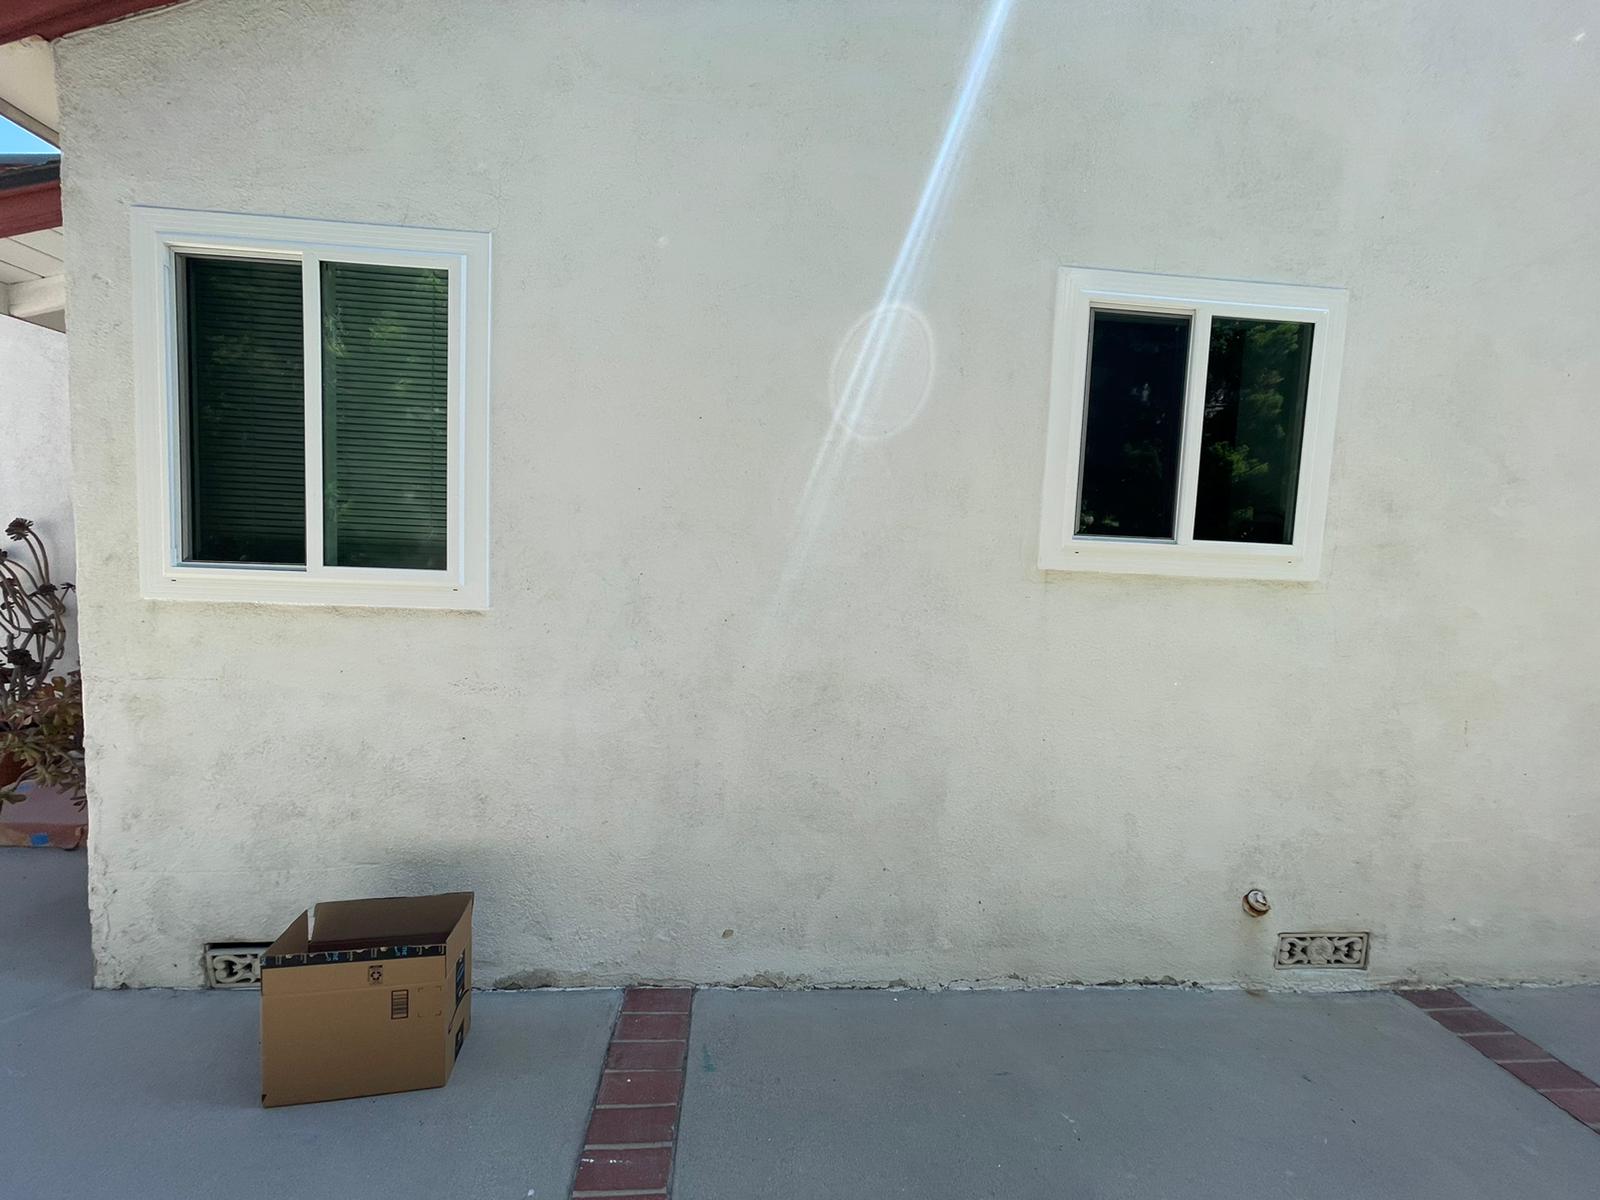 Window Replacement Project in Burbank, CA